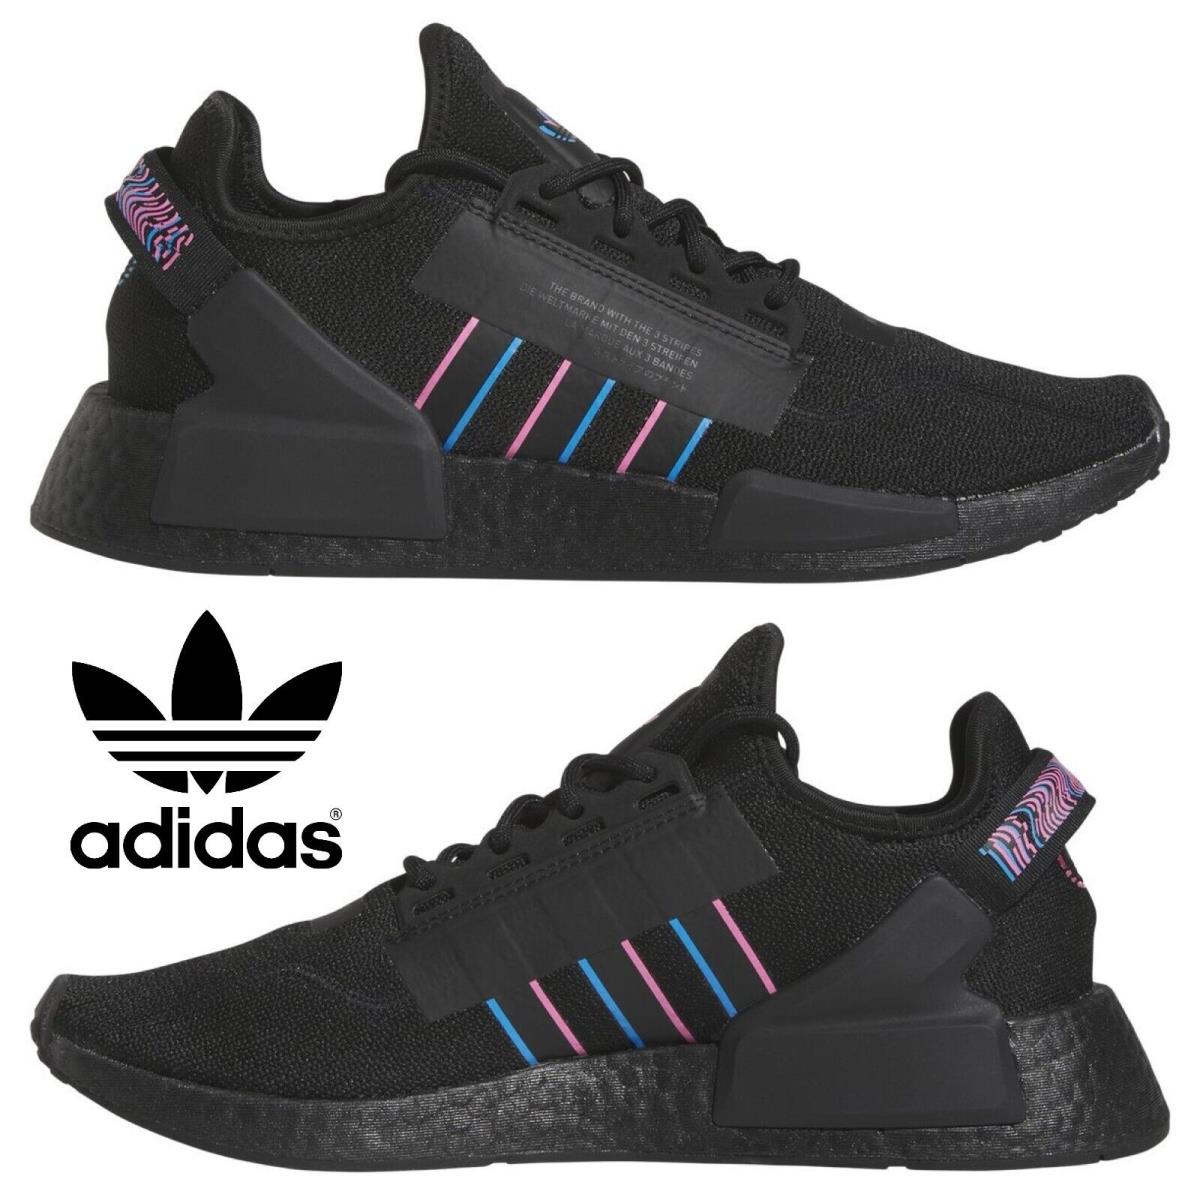 Adidas Originals Nmd R1 Men`s Sneakers Running Shoes Gym Casual Sport Black